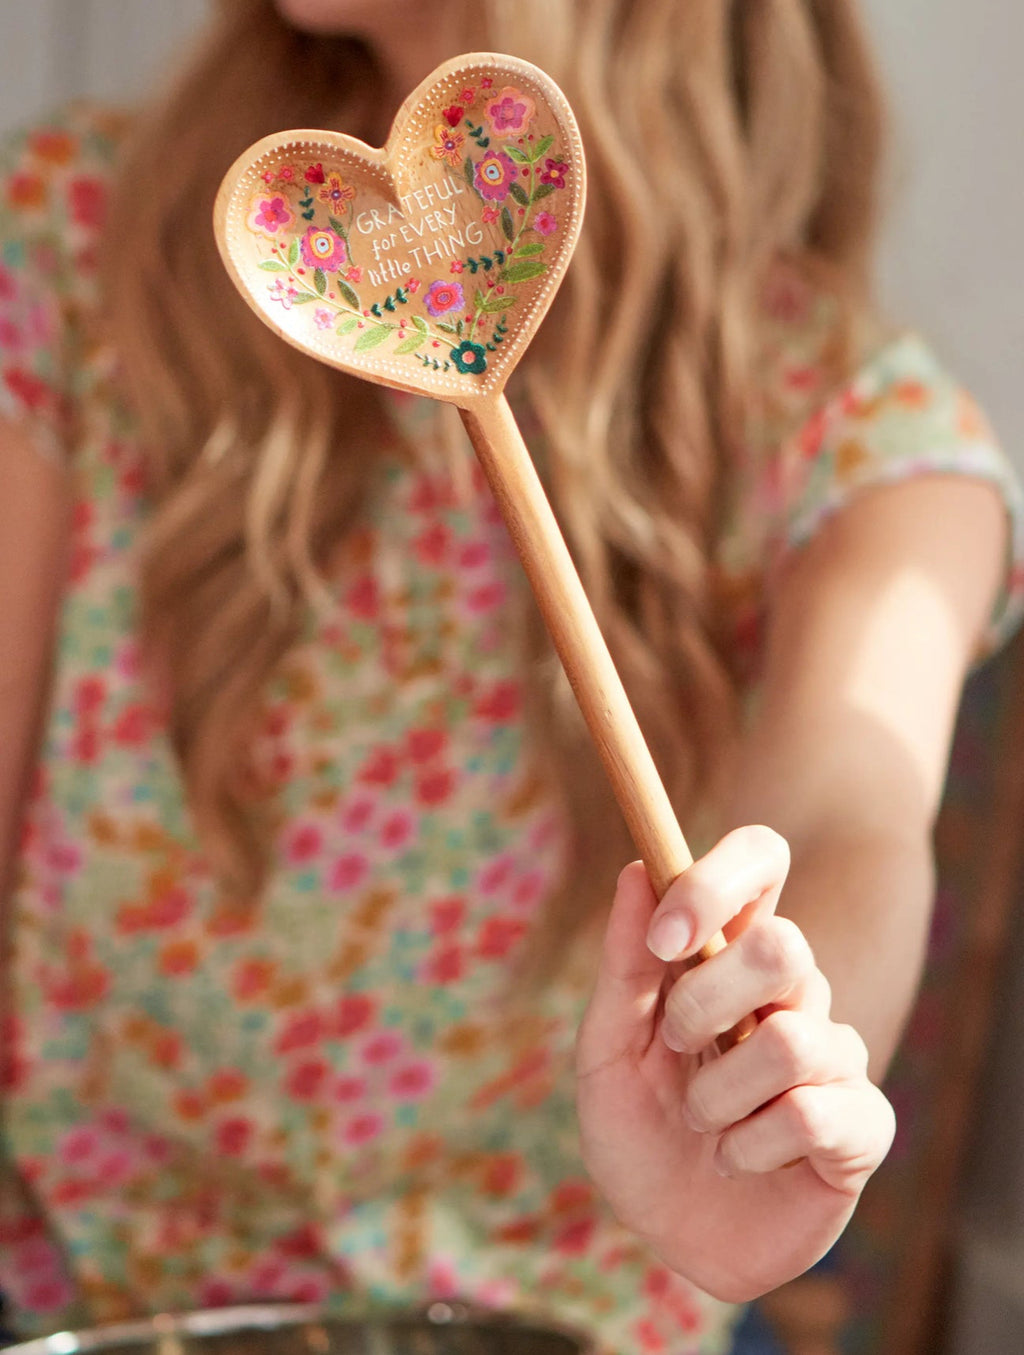 Natural Life Cutest Wooden Spoon Ever - Grateful